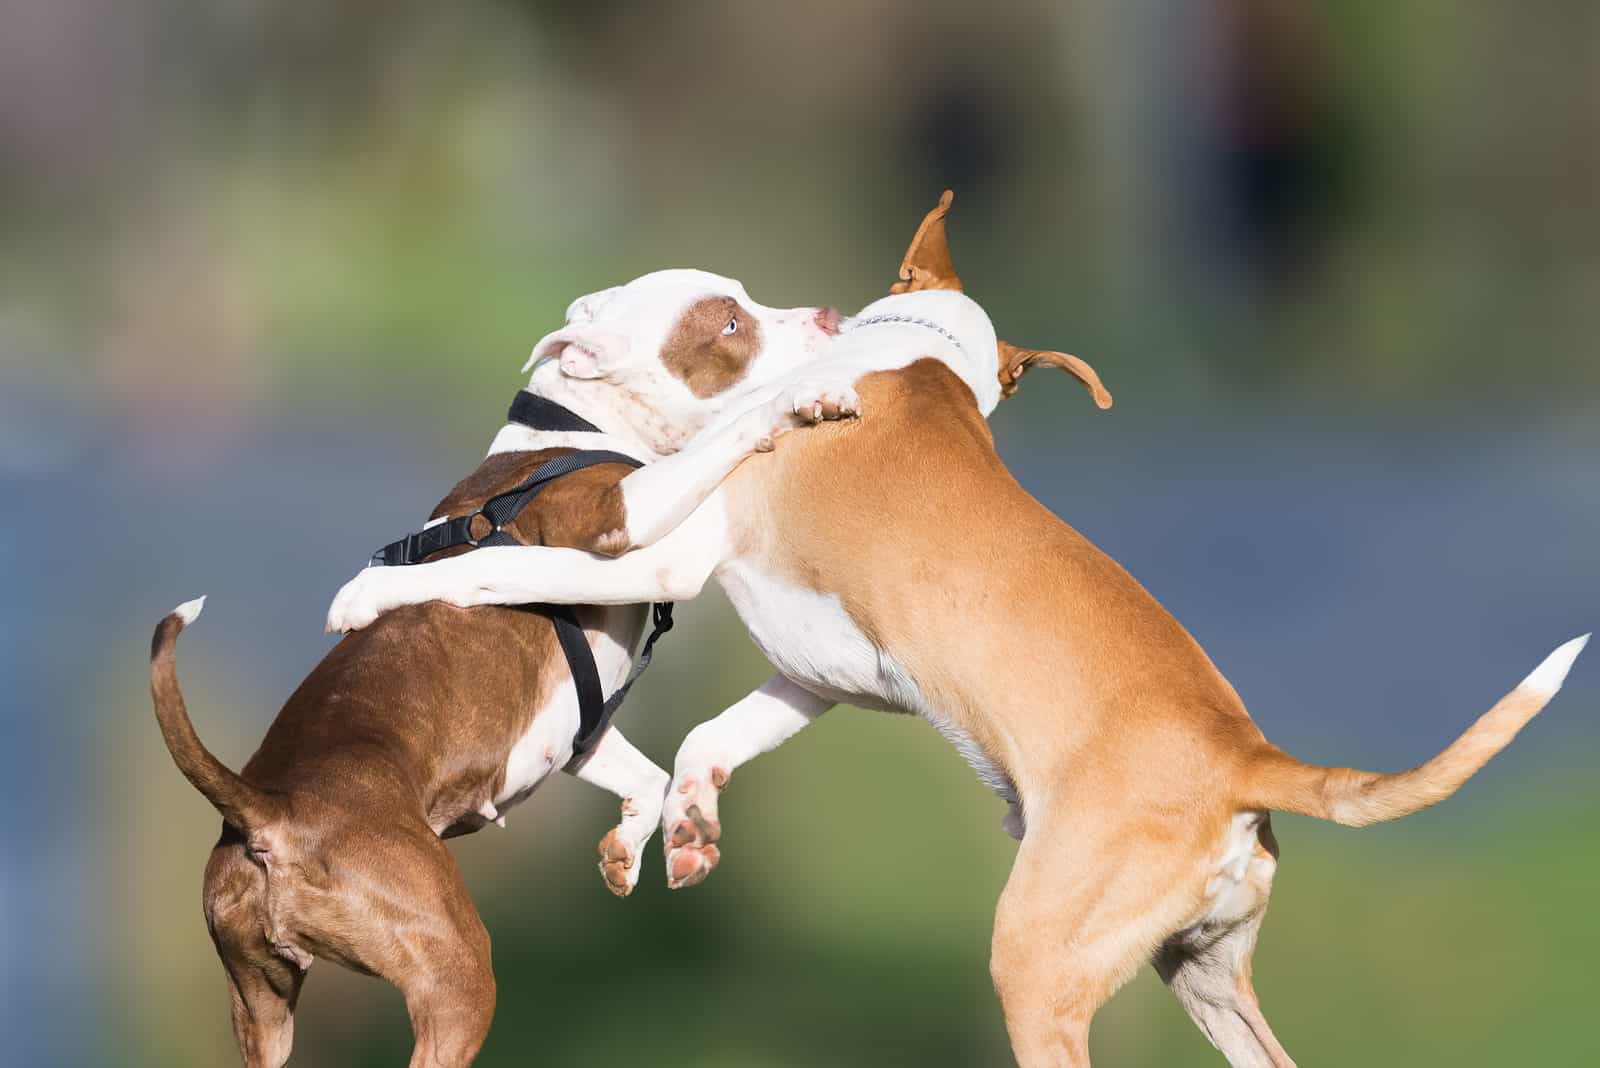 two dogs fighting outdoor in the park